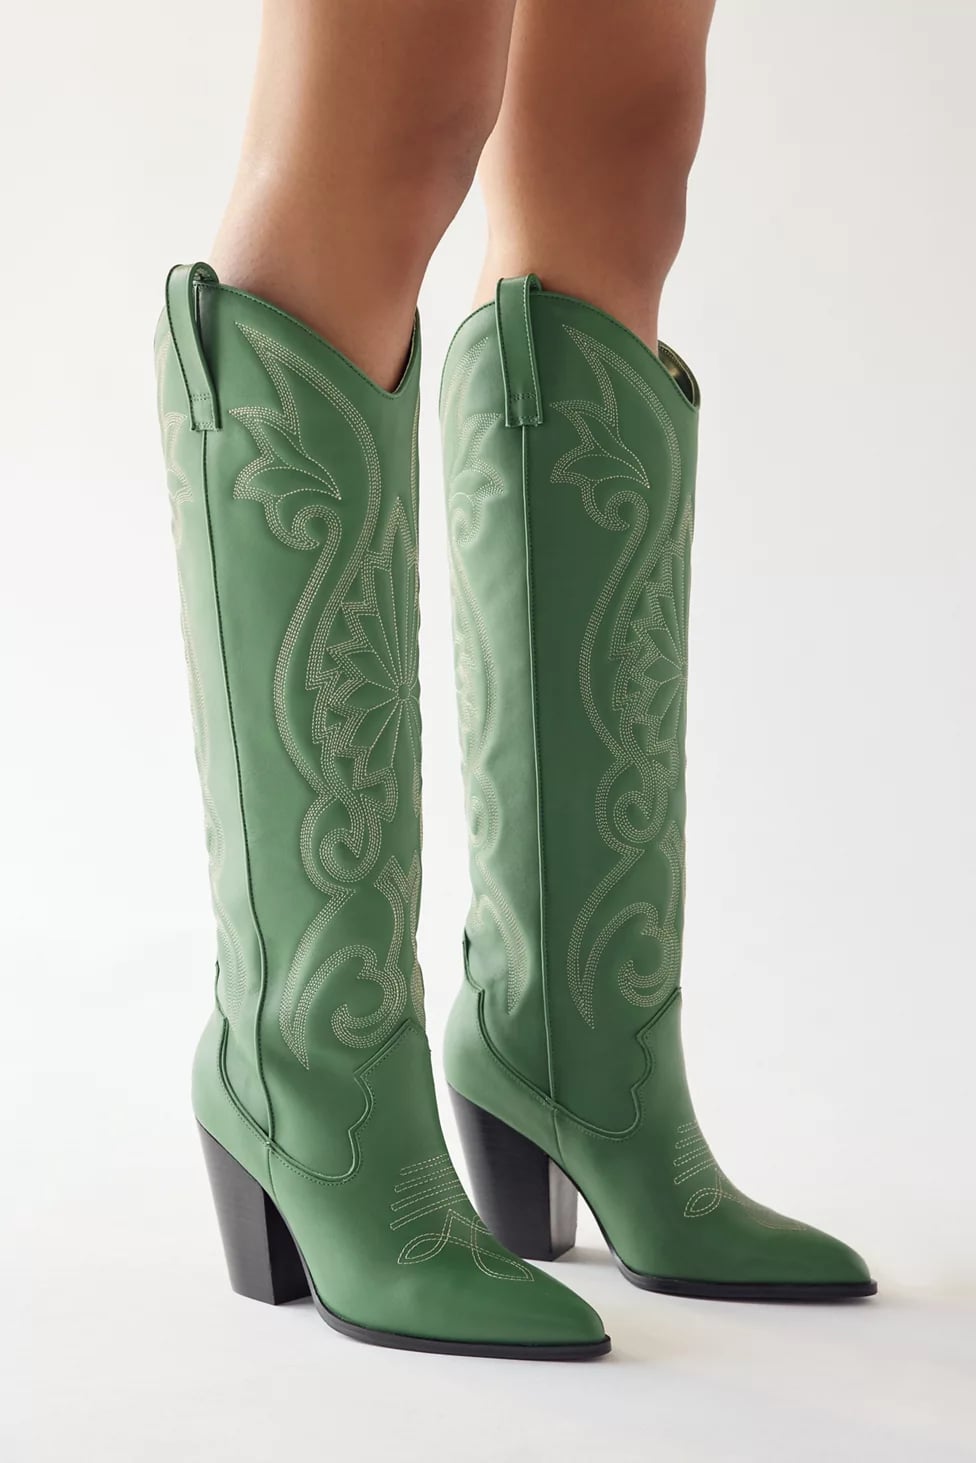 Green Boots: Steve Madden Lasso Cowboy Boot | Not Sure About Cowboy Boot Trend? You Will Be After Seeing These 12 Pairs | POPSUGAR Fashion Photo 4